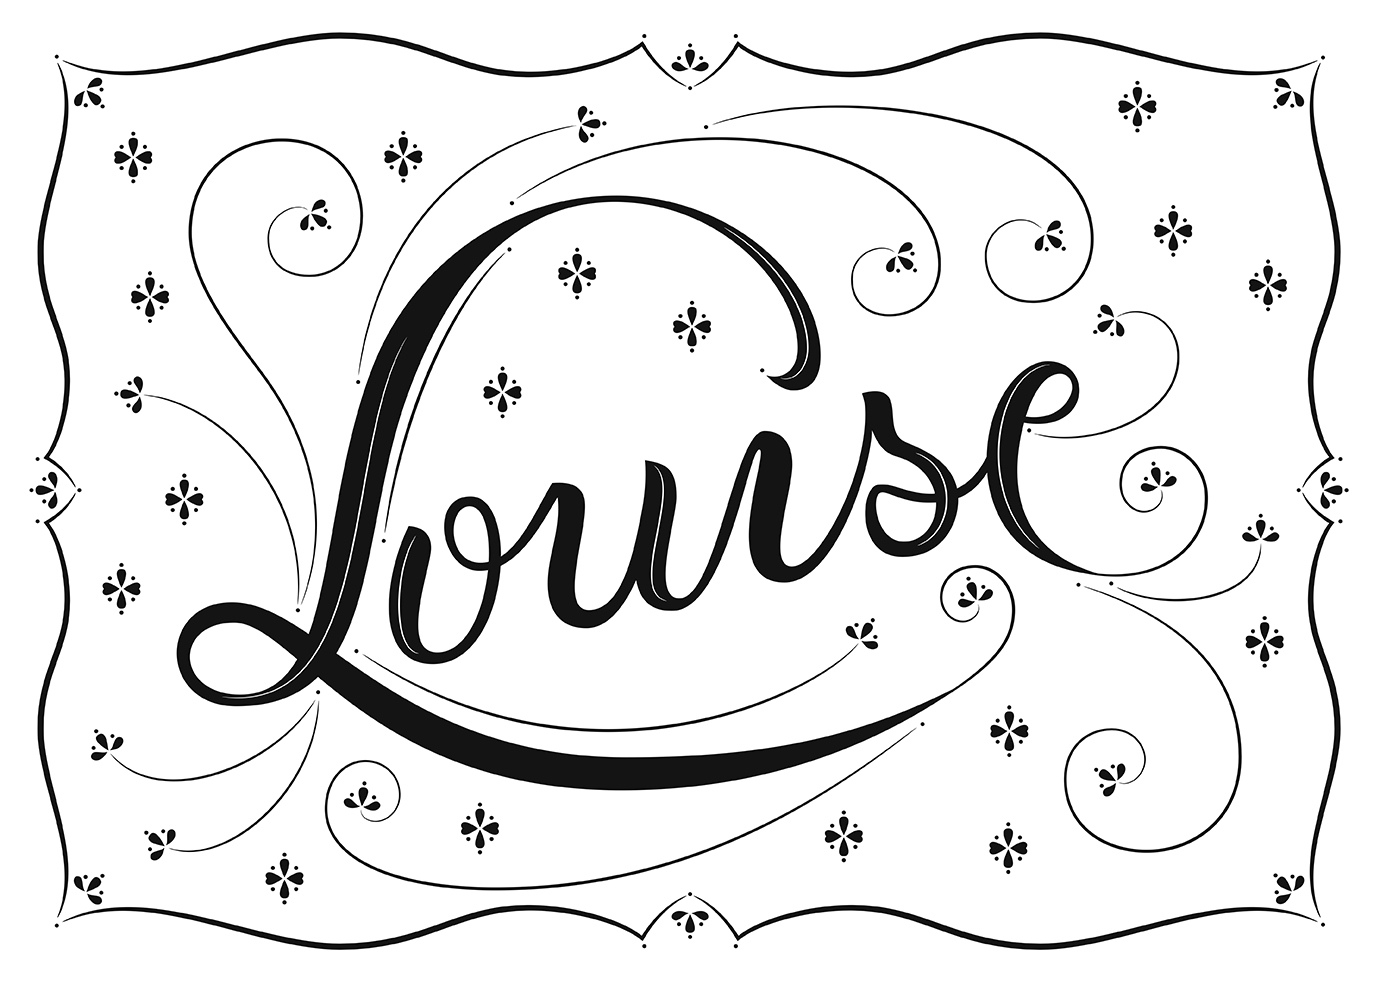 Lettering piece "Louise" in black and white